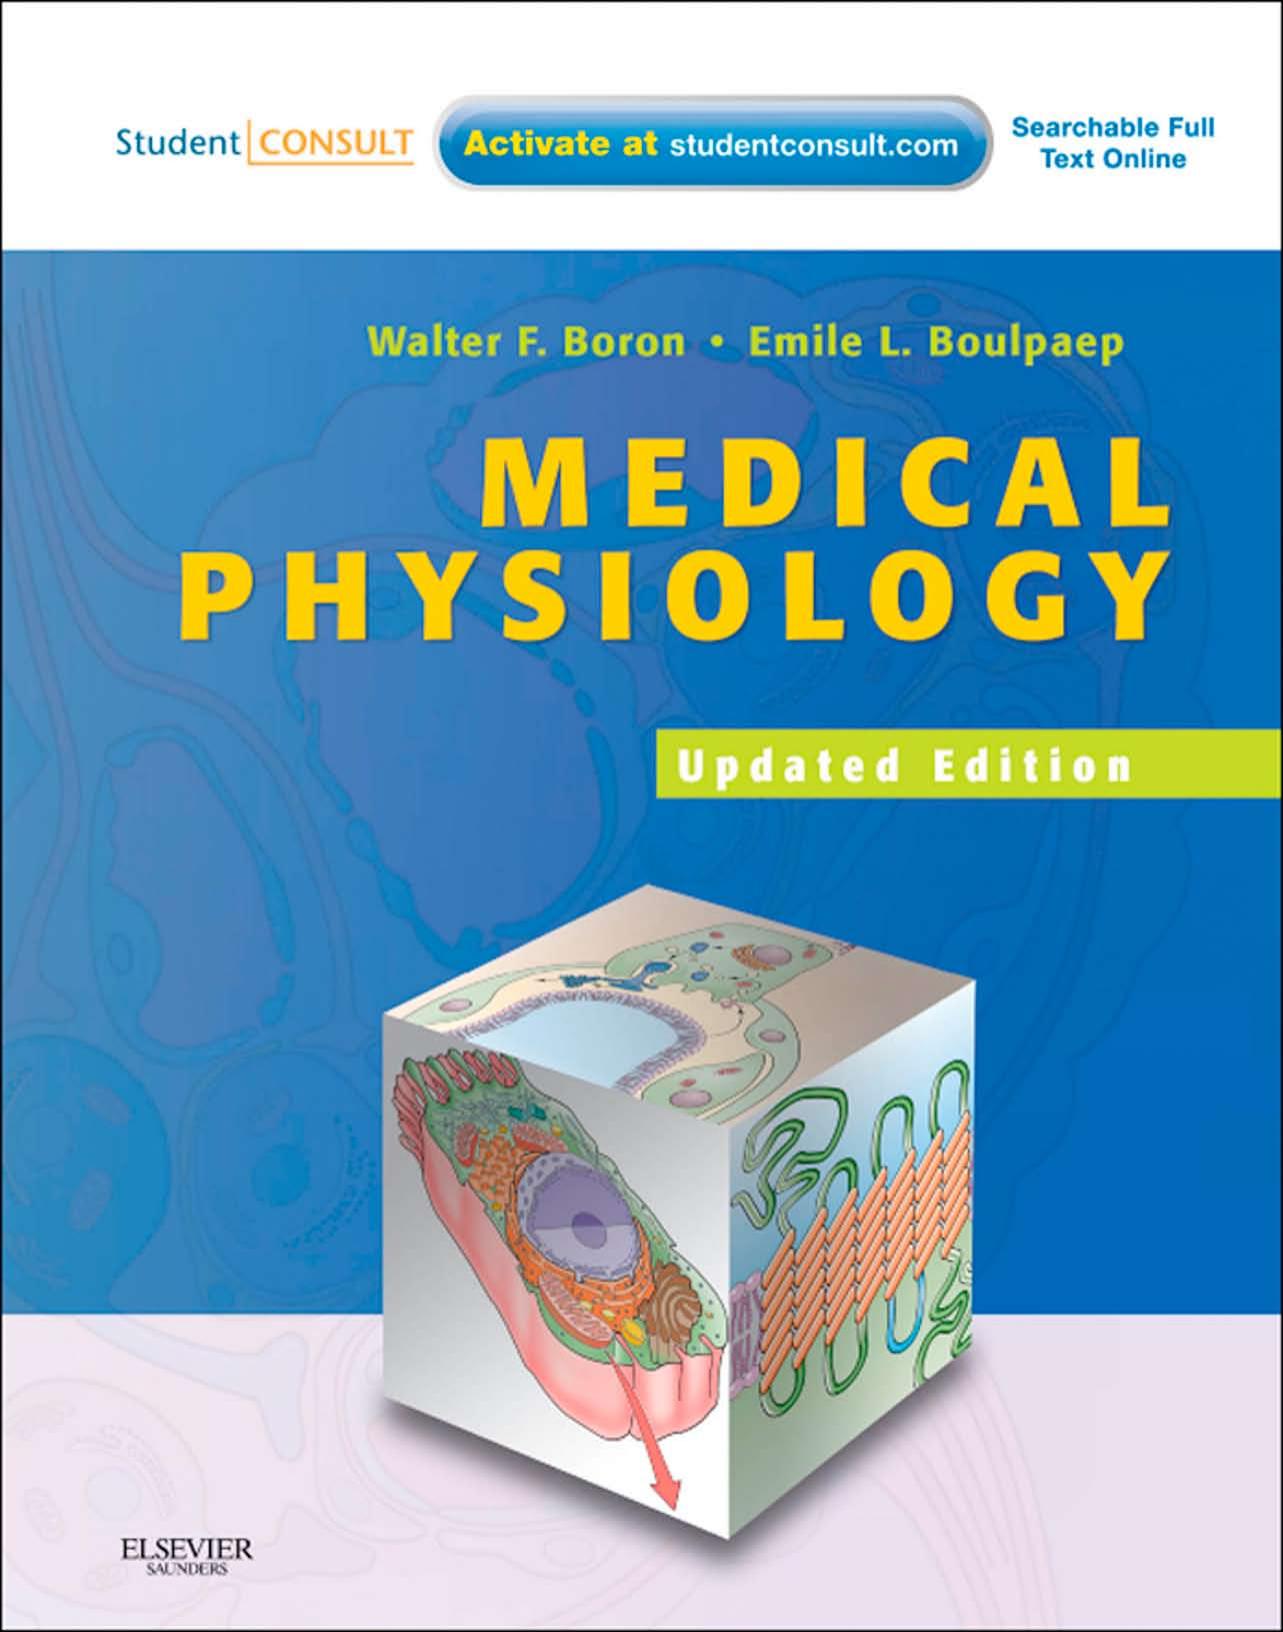 Medical Physiology, Updated Edition  With STUDENT CONSULT Online Access, 2012